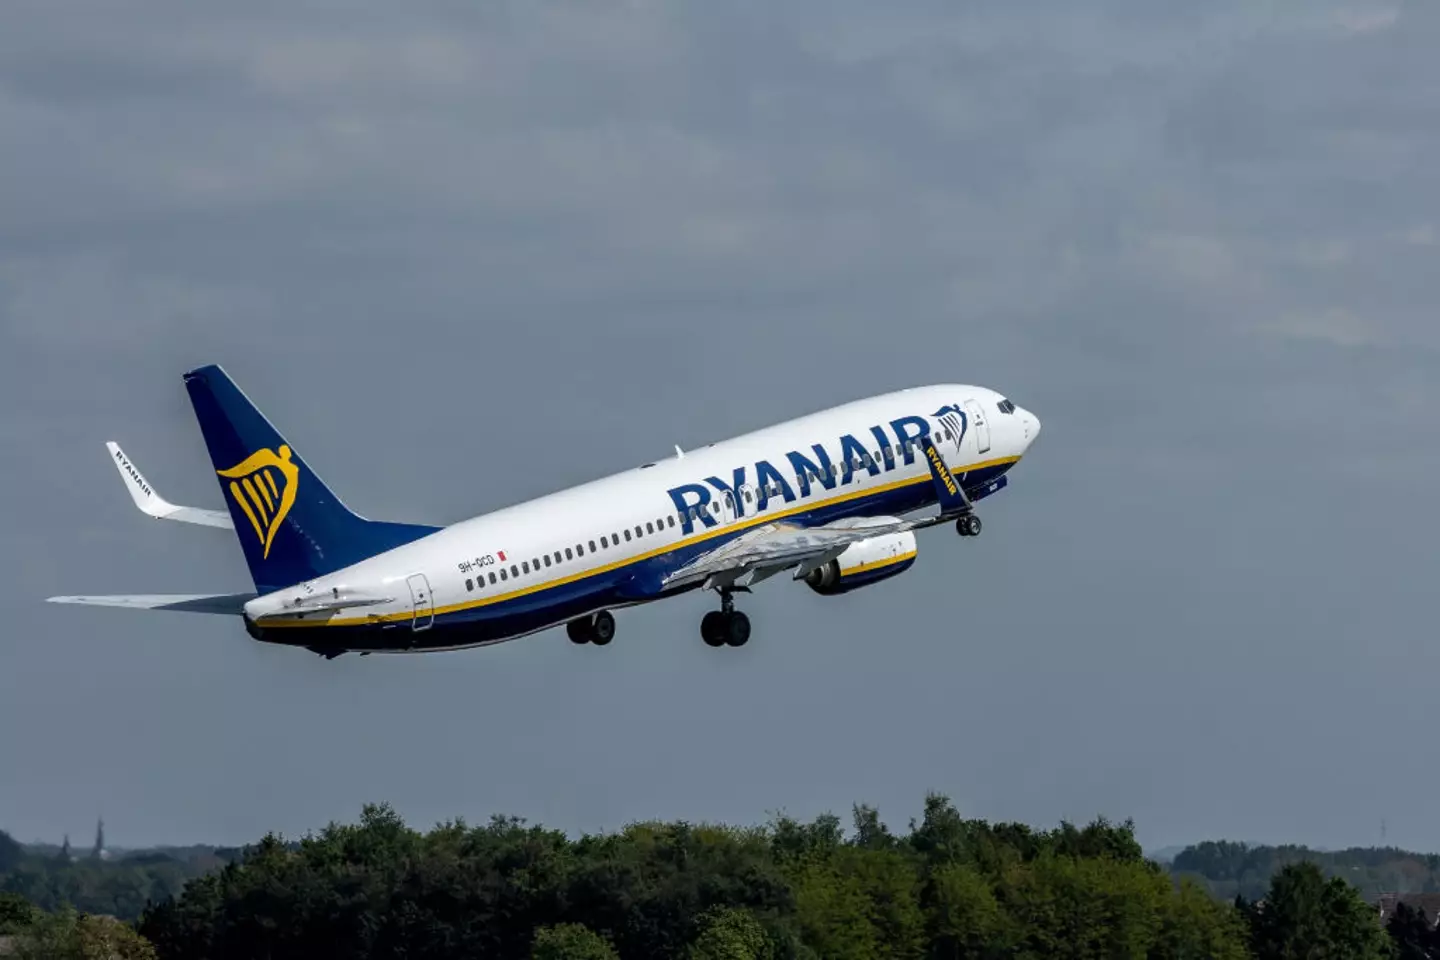 The couple had booked a Ryanair flight to jet off to Barcelona. (Omar Havana/Getty Images)